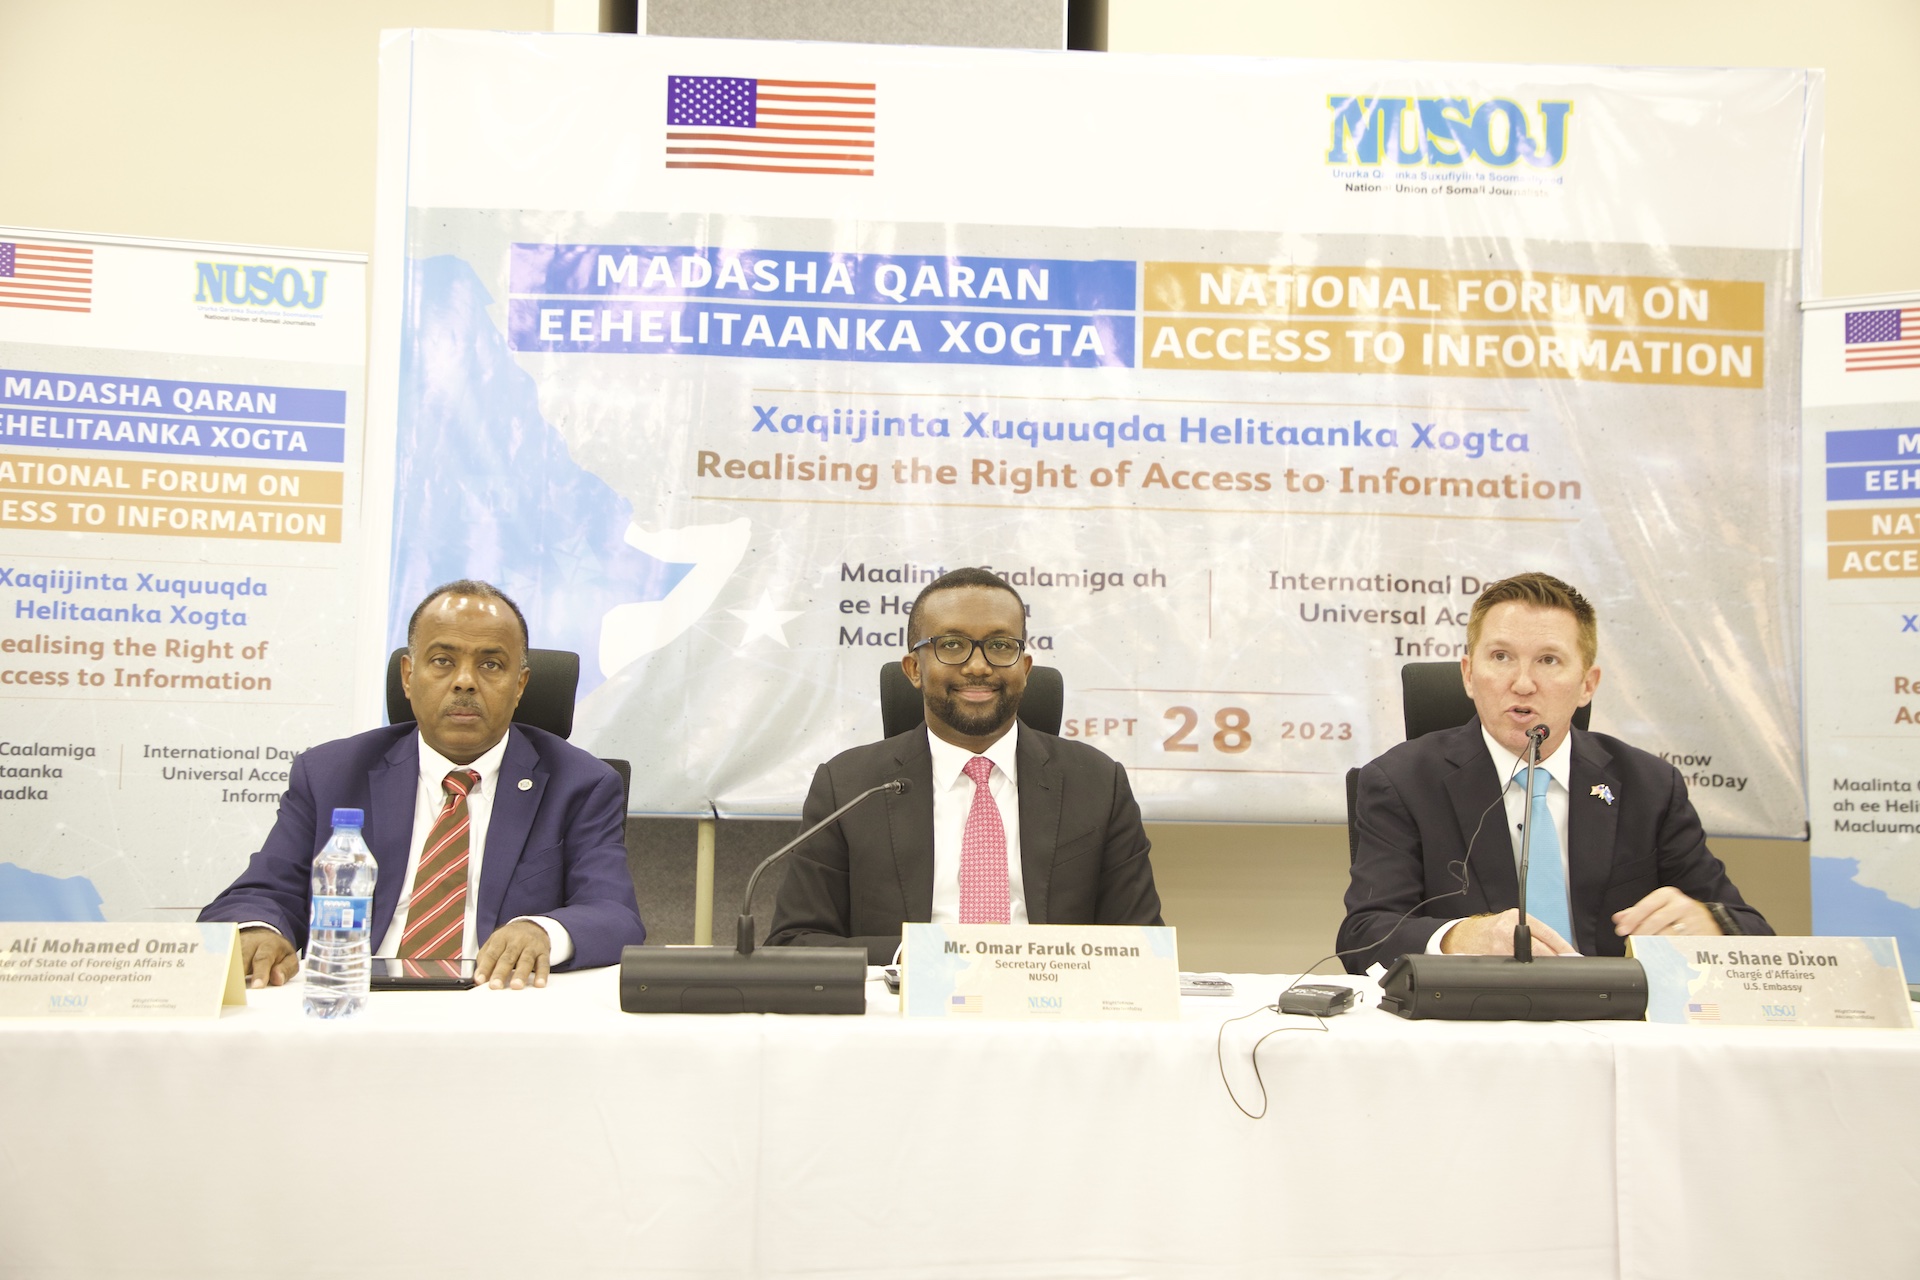 Prominent Figures Convene at Inaugural National Forum to Propel Access to Information and Foster Democratic Engagement in Somalia